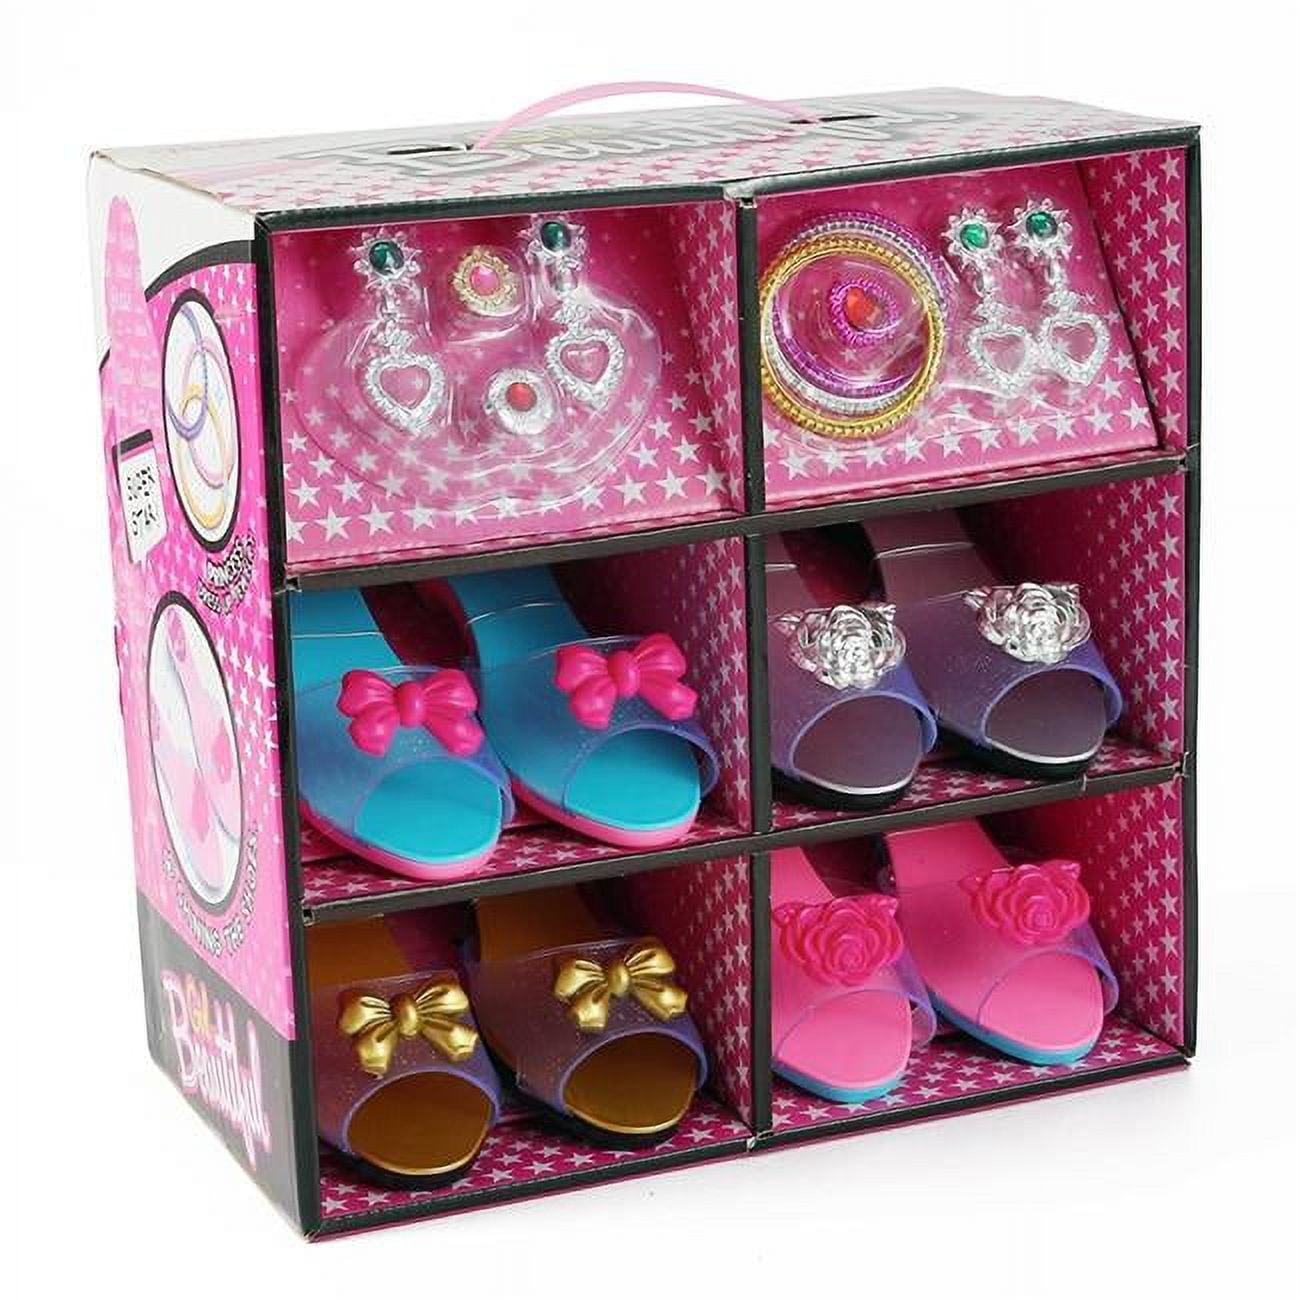 Picture of Azimport PS003 Princess Dress Up & Play Shoe & Jewelry Boutique Collection